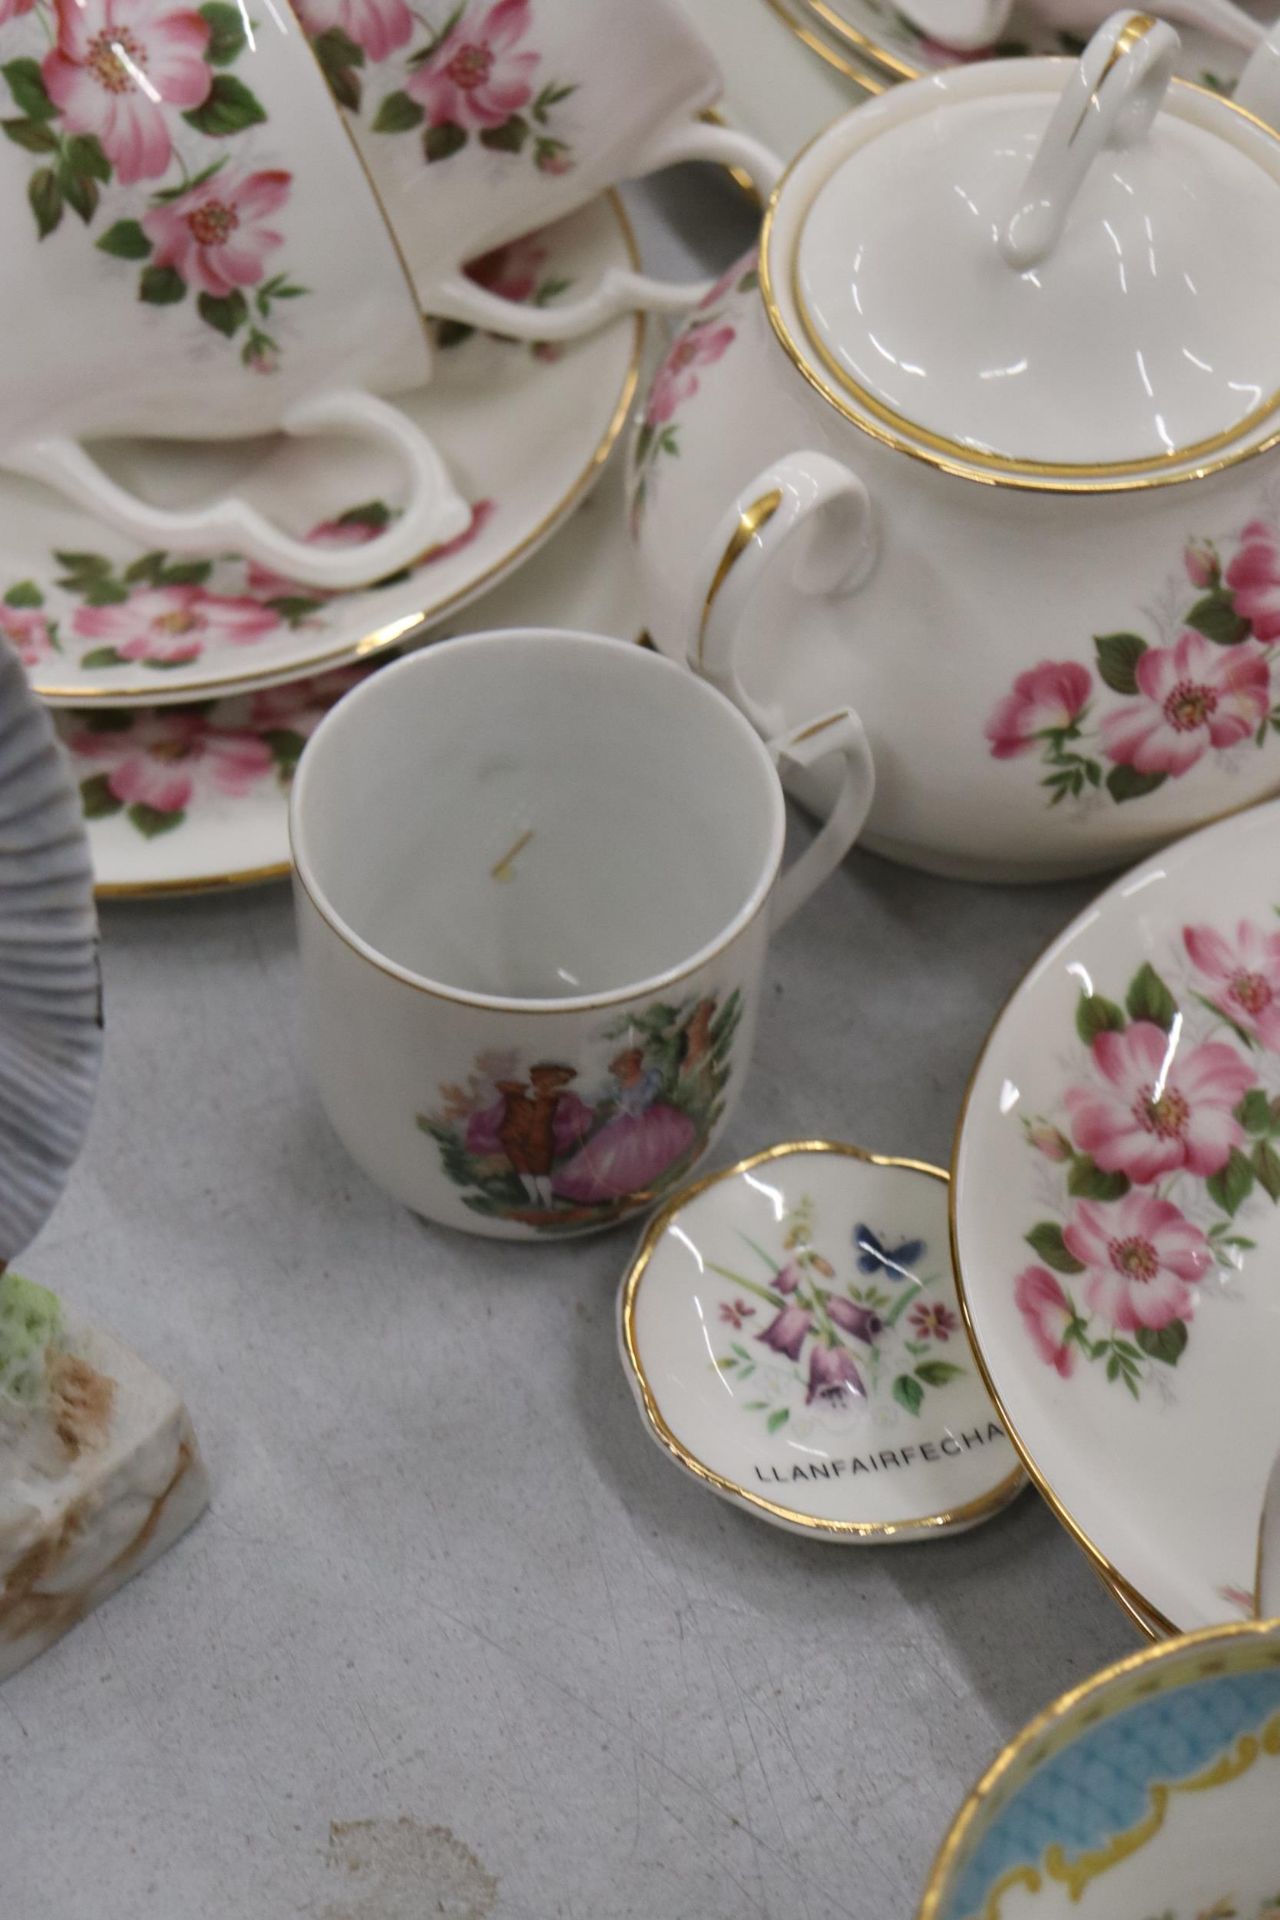 A ROYAL KENT, FLORAL, CHINA TEASET TO INCLUDE A CAKE PLATE, CREAM JUG, SUGAR BOWL, CUPS, SAUCERS AND - Image 9 of 11